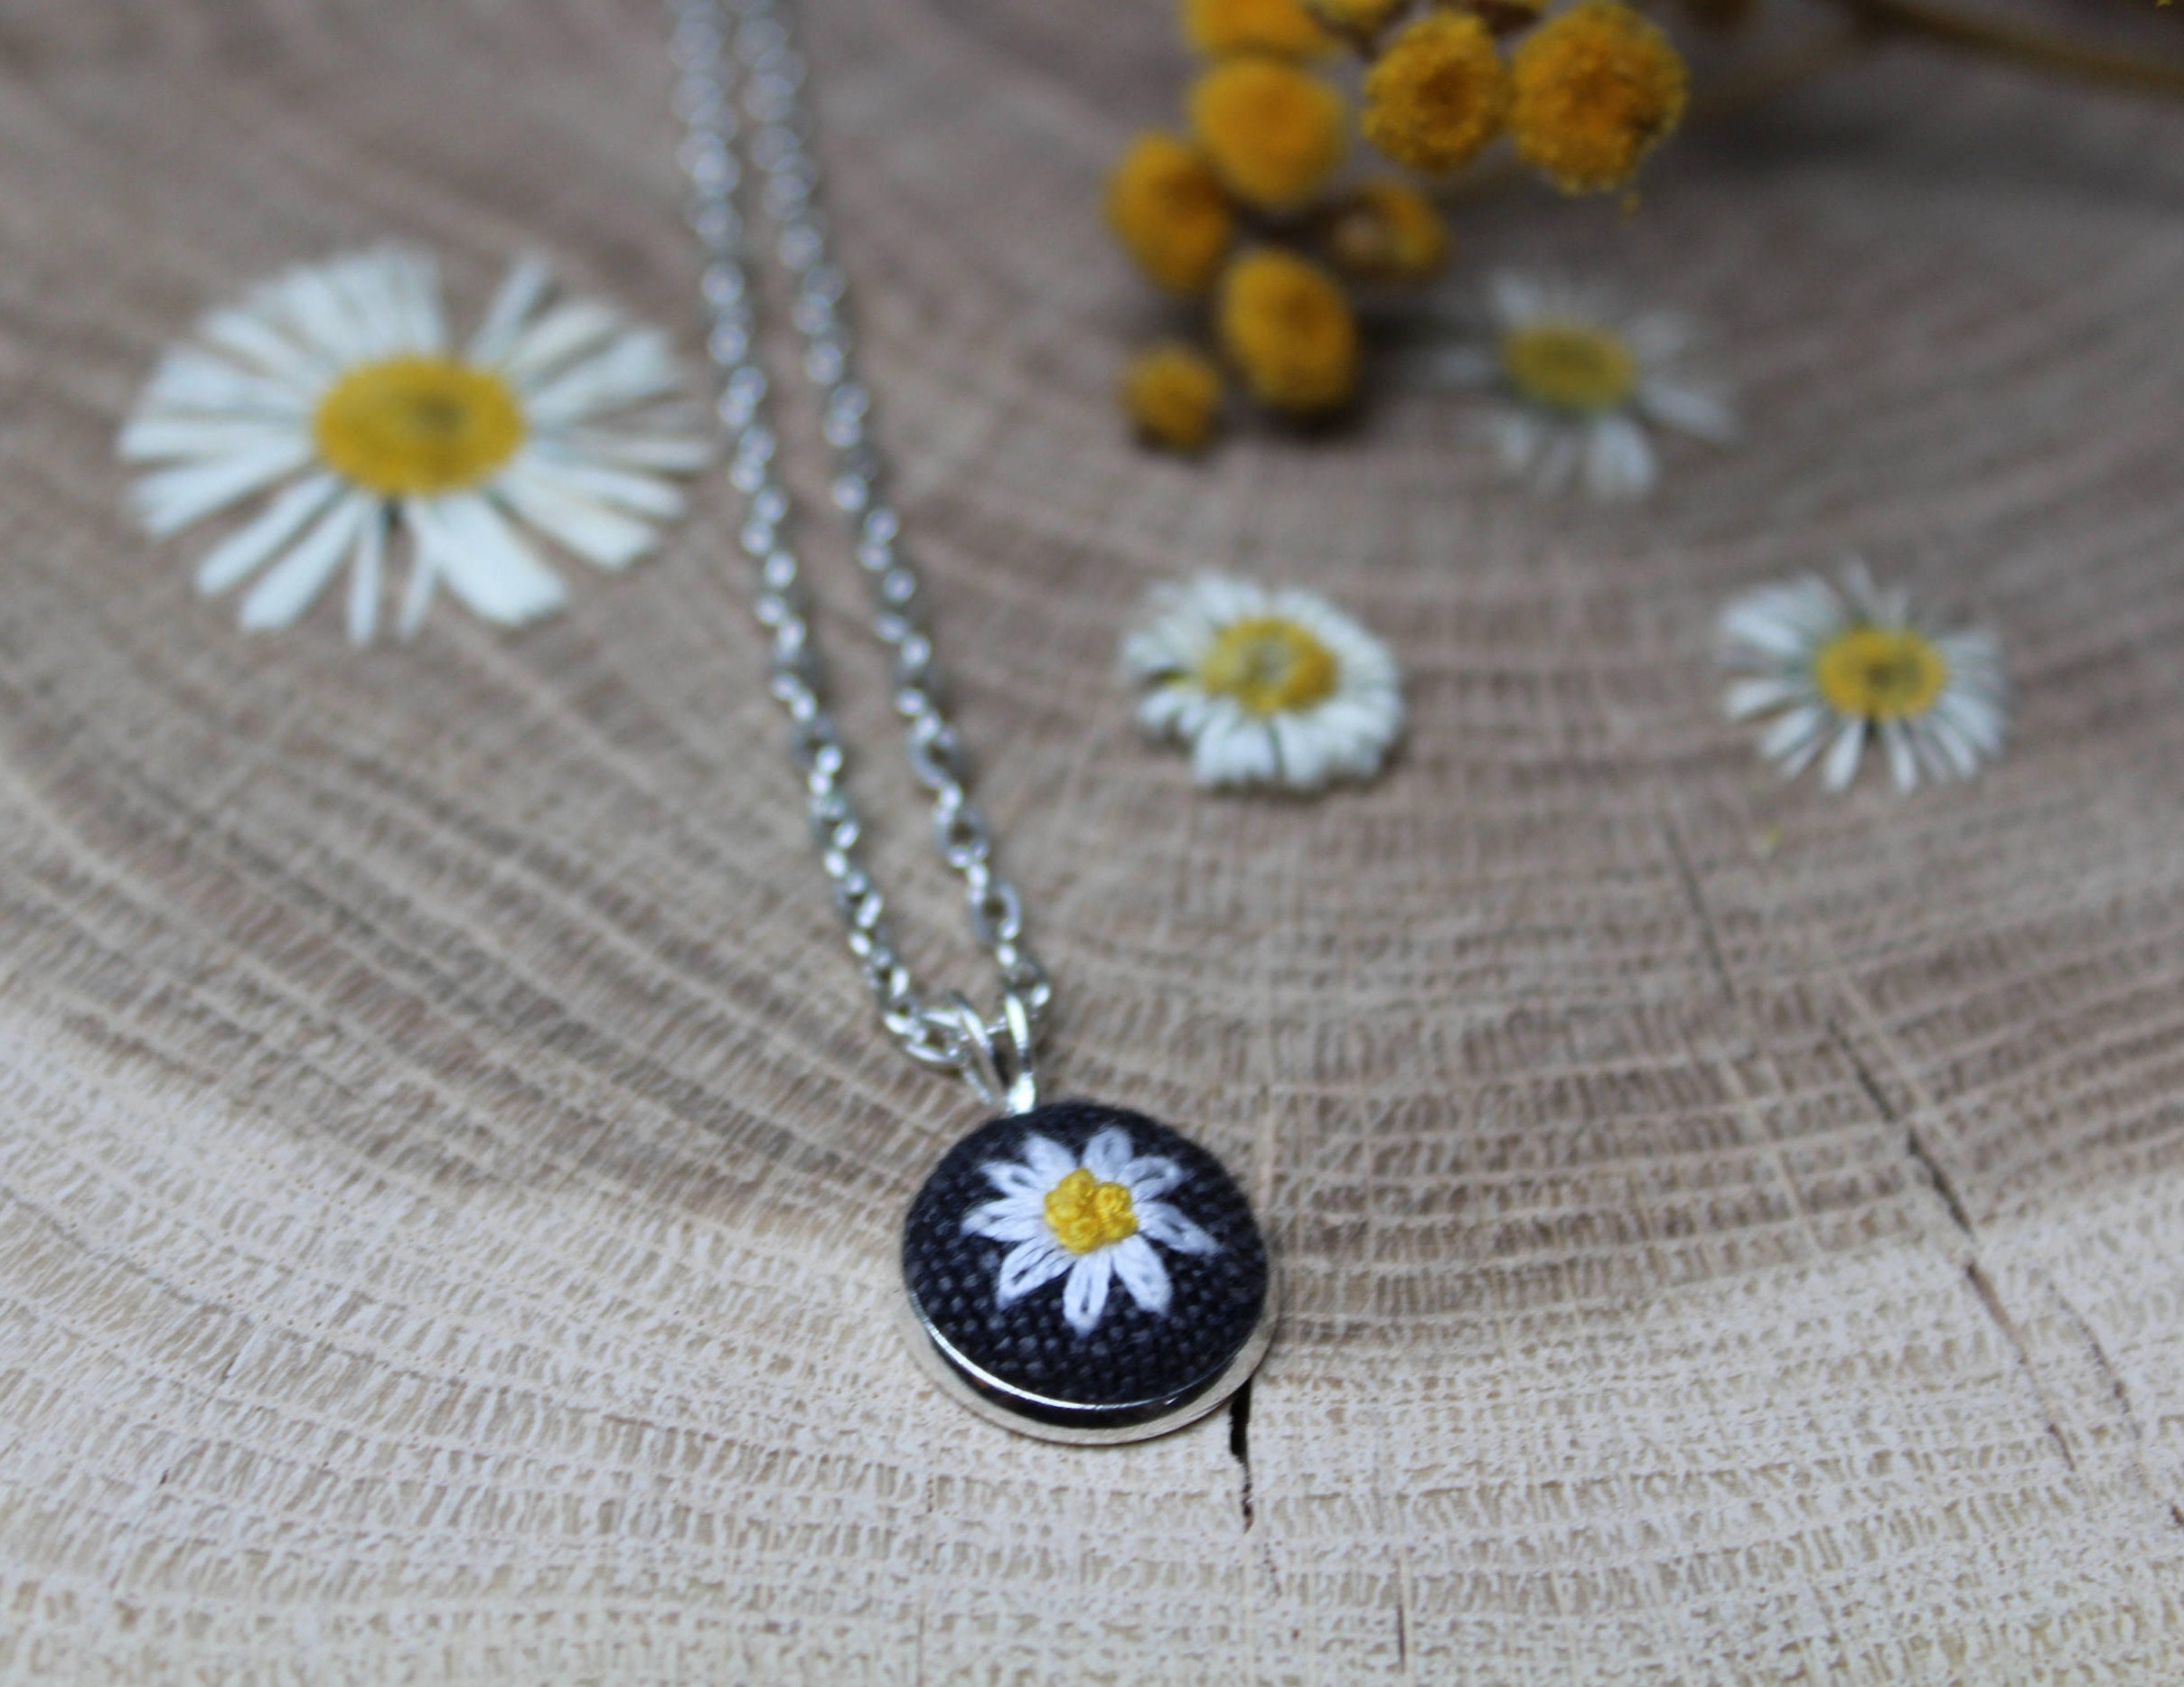 Beautiful little flower pendant hand embroidered